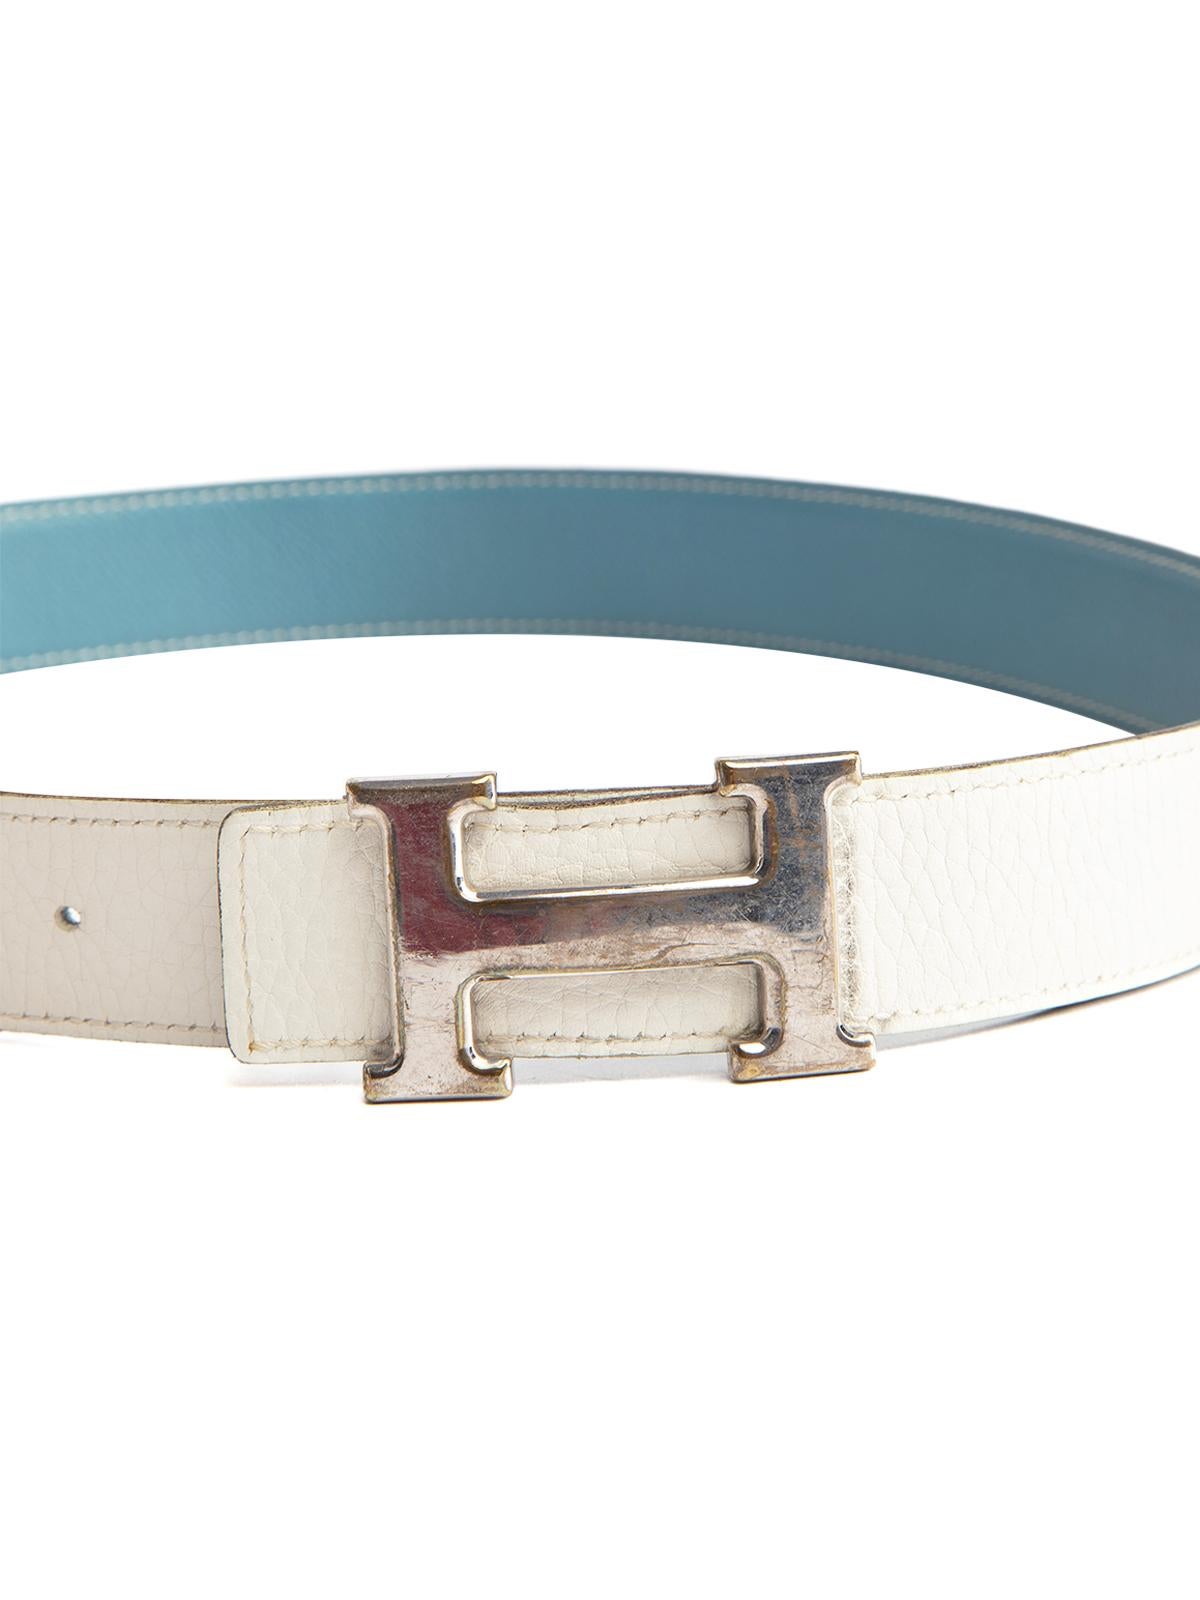 CONDITION is Good. Minor wear to belt is evident. Light wear to leather material and some stain to interior of belt near the buckle on this used Hermes designer resale item. Details Blue, white Leather Reversible Silver H logo buckle Comes with